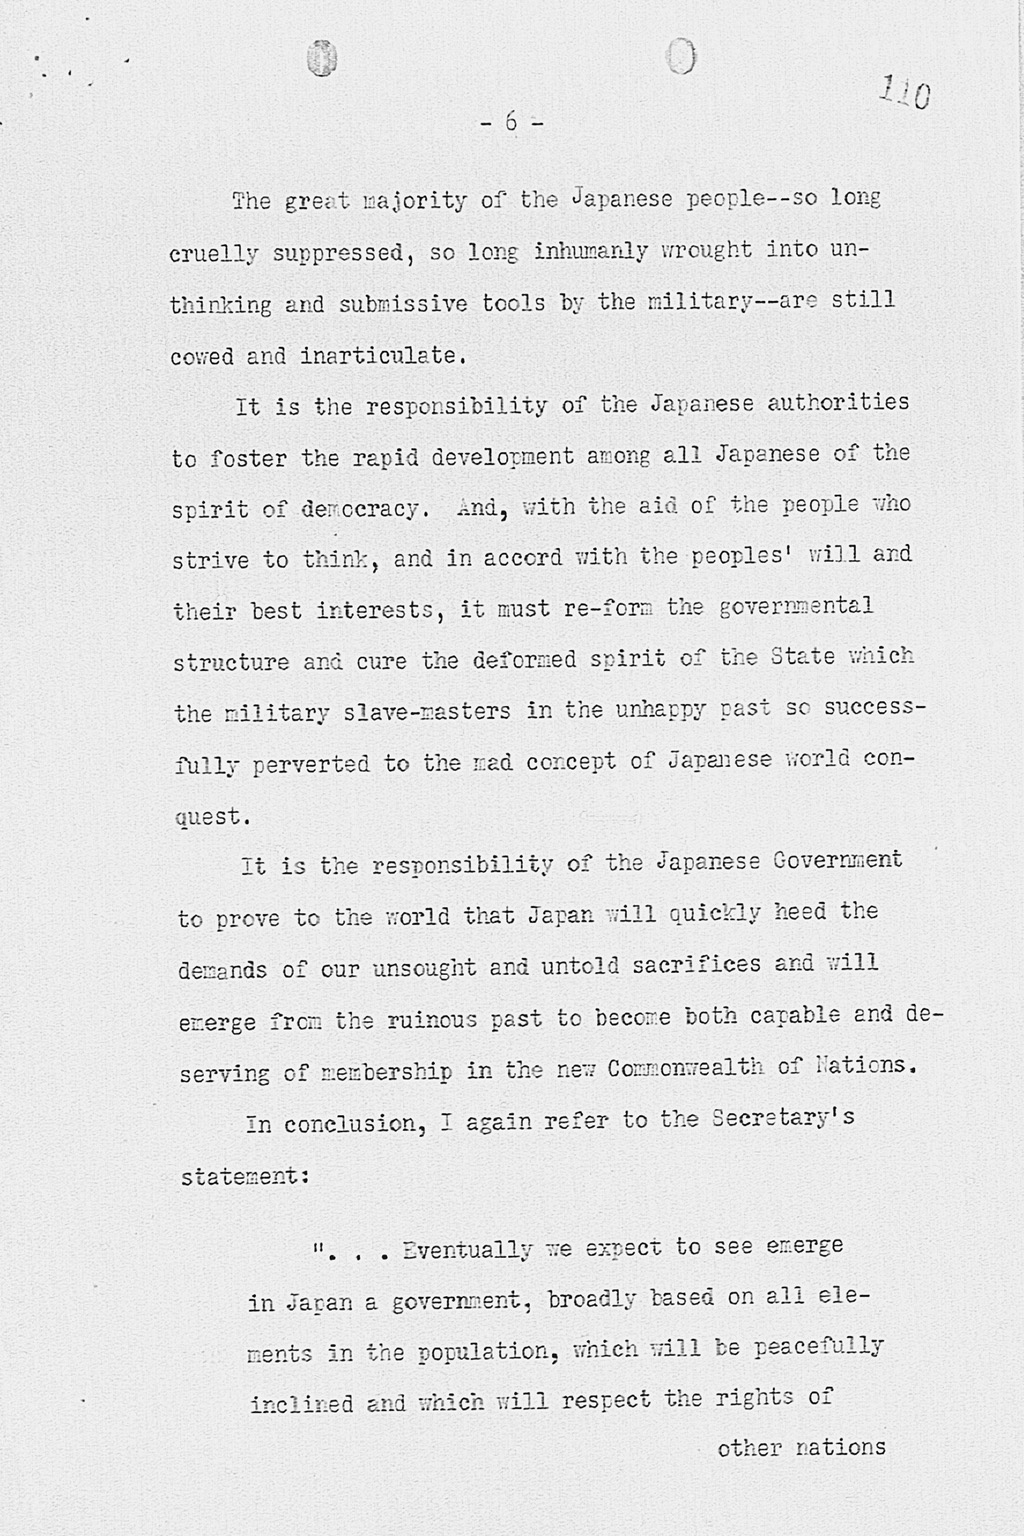 『Letter from George Atcheson Jr. to Dean Acheson, Under Secretary of State dated November 7, 1945.』(拡大画像)